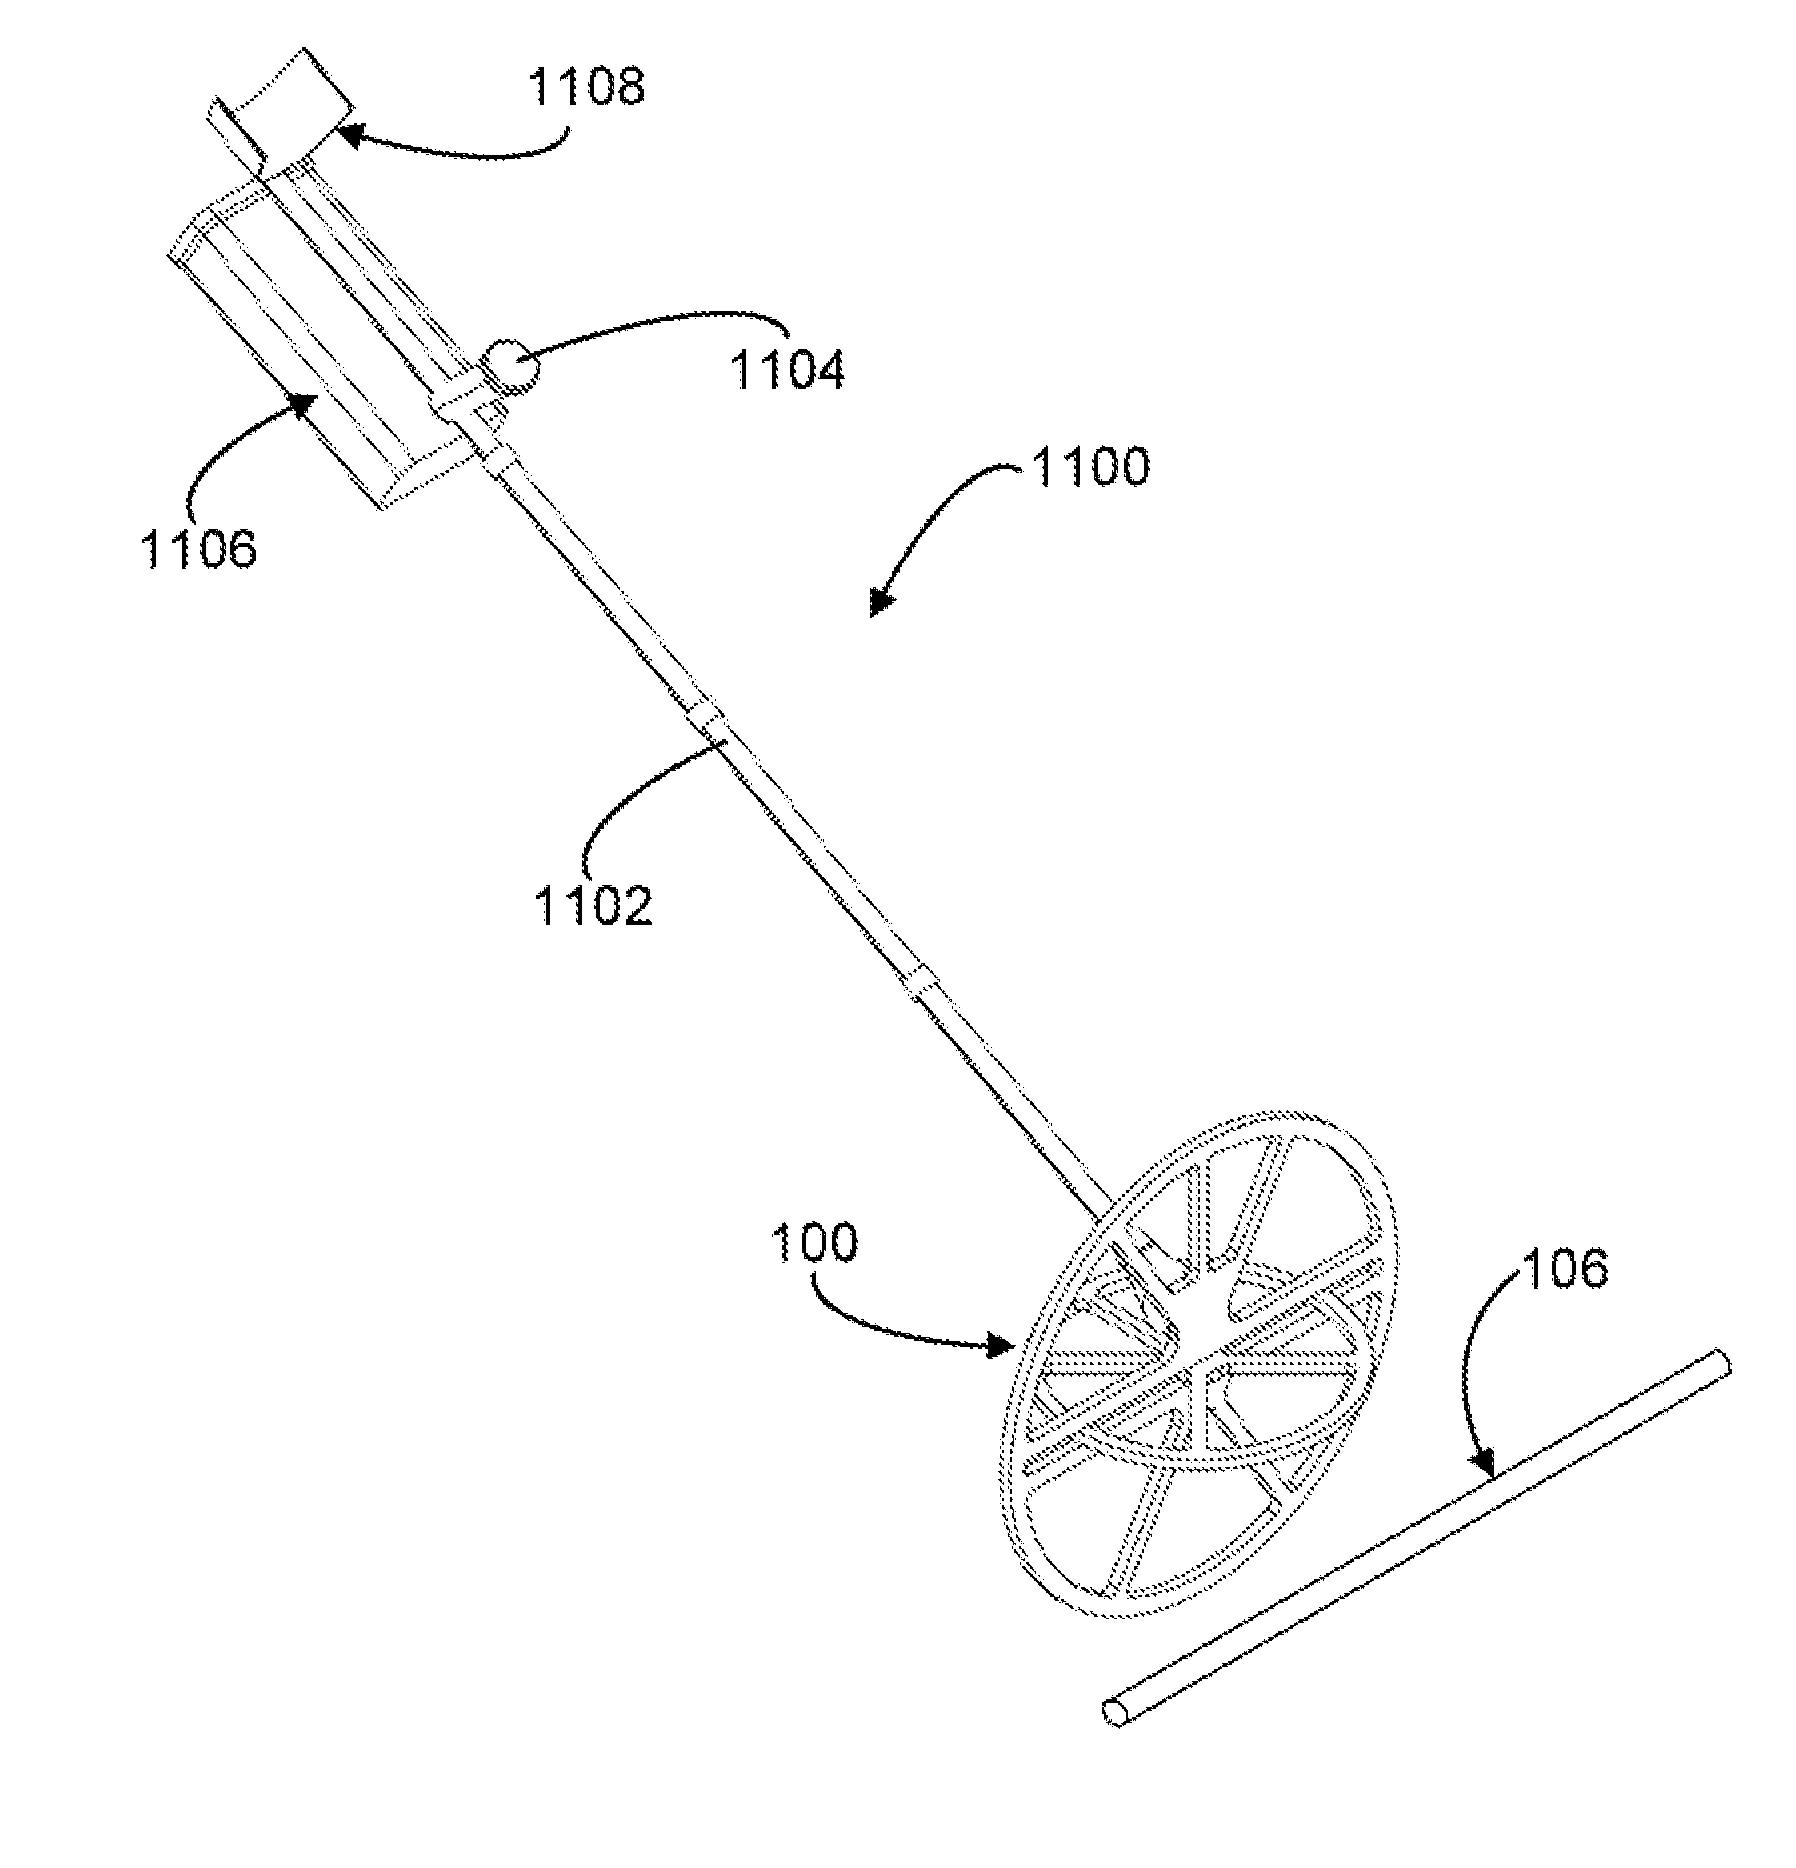 Search coil assembly and system for metal detection